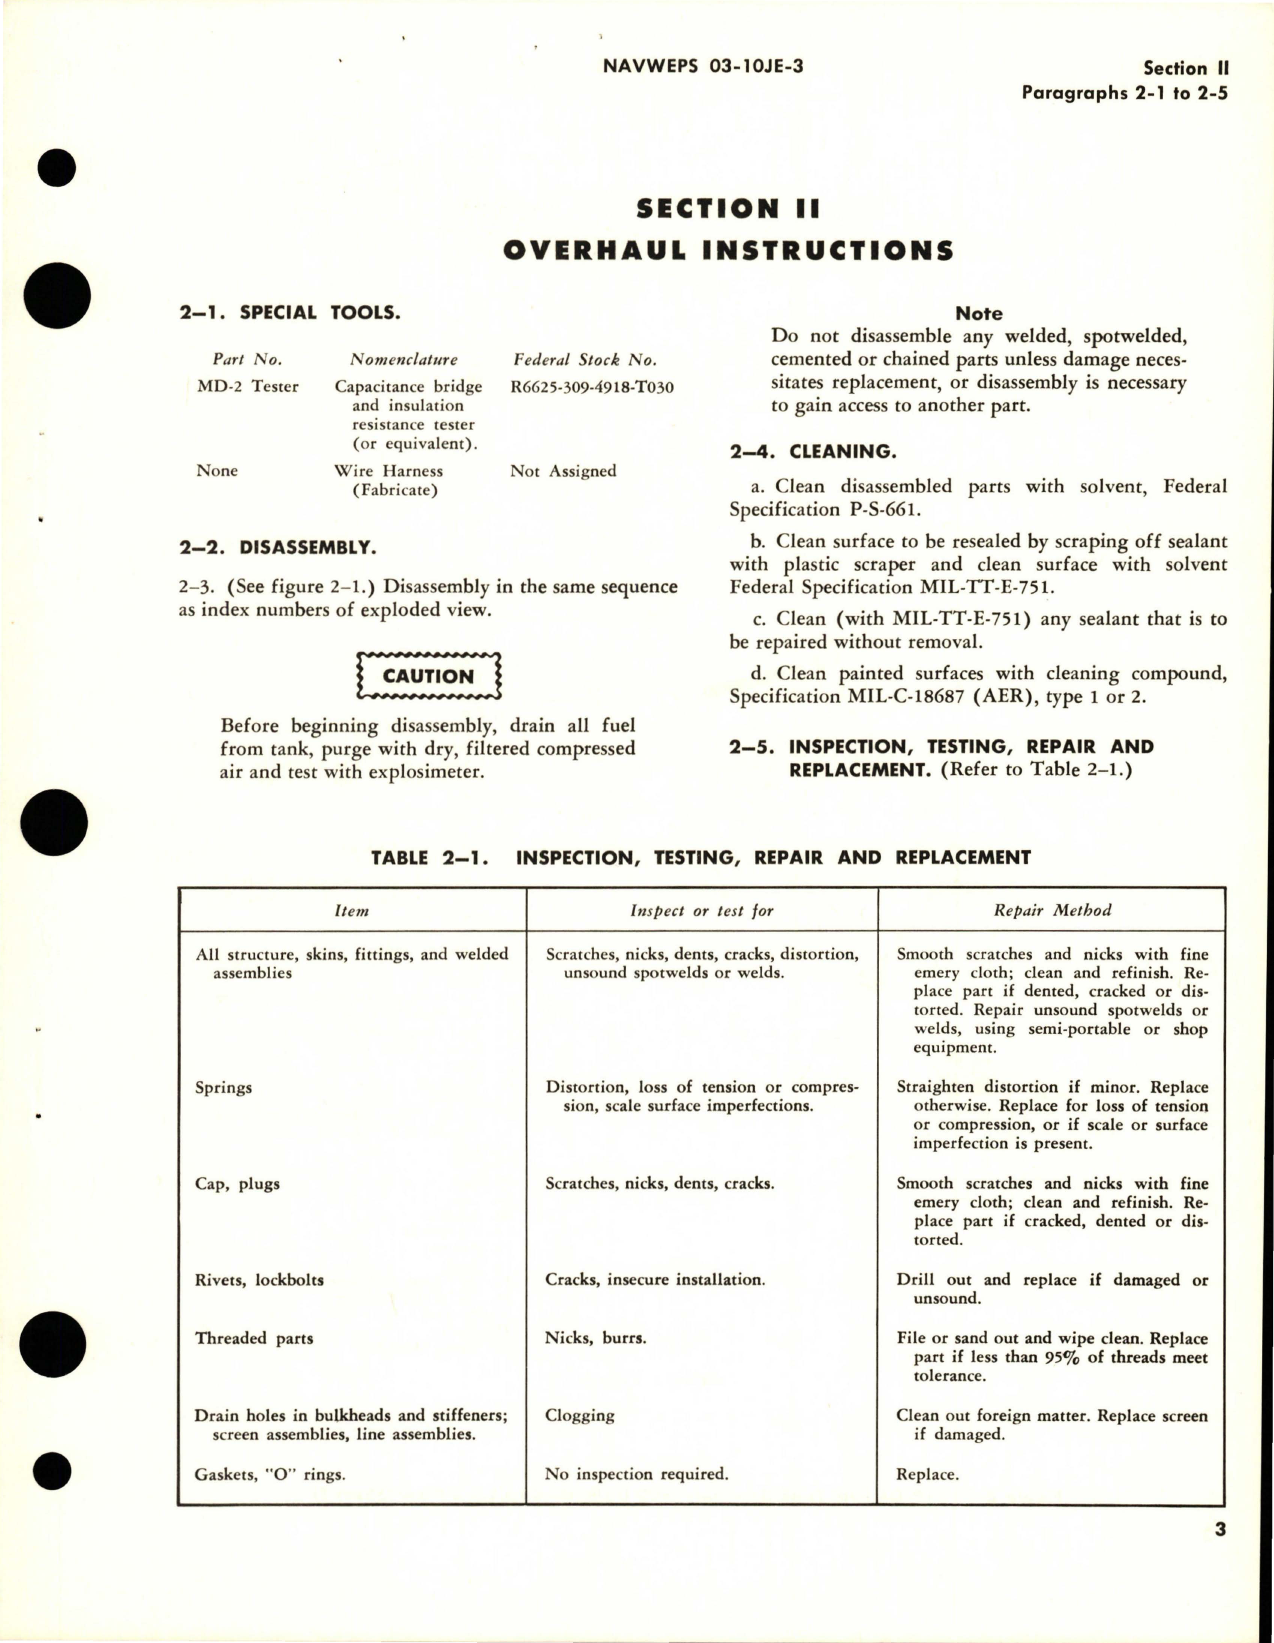 Sample page 7 from AirCorps Library document: Overhaul Instructions for Fuel Tank Assembly - 400 Gallon - Parts 5556400 and 5556400-501